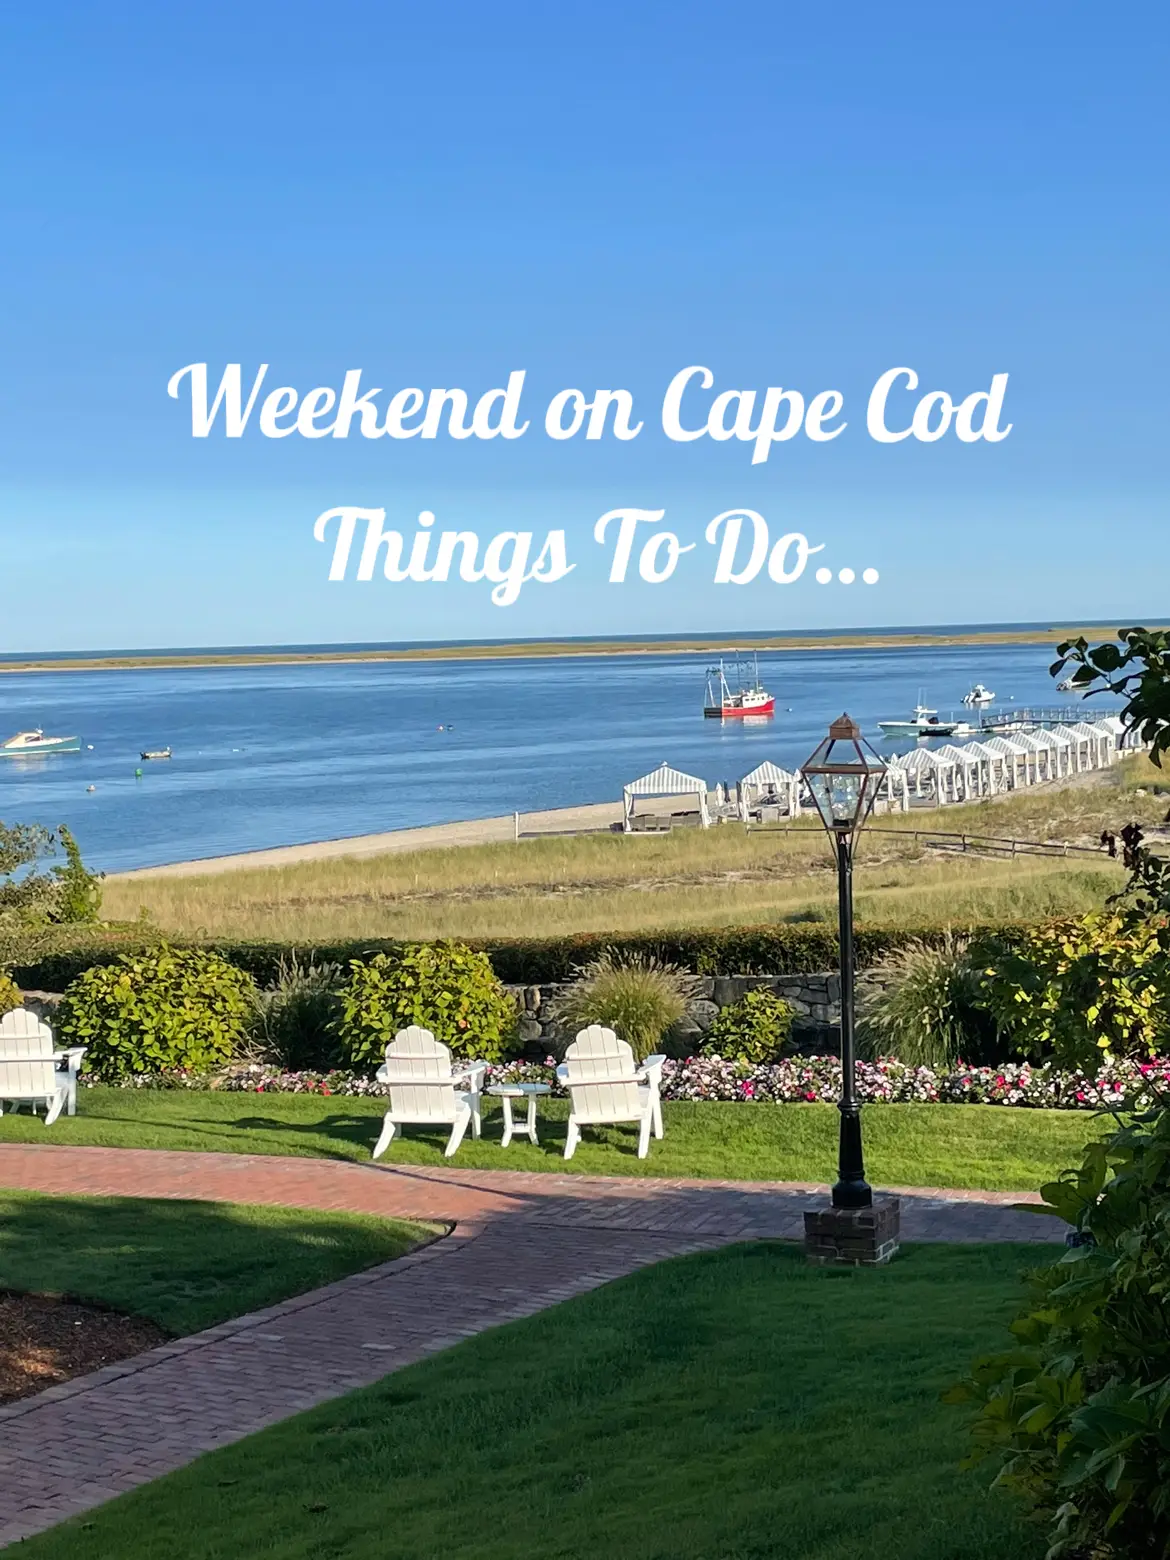 Weekend on Cape Cod | Things To Do's images